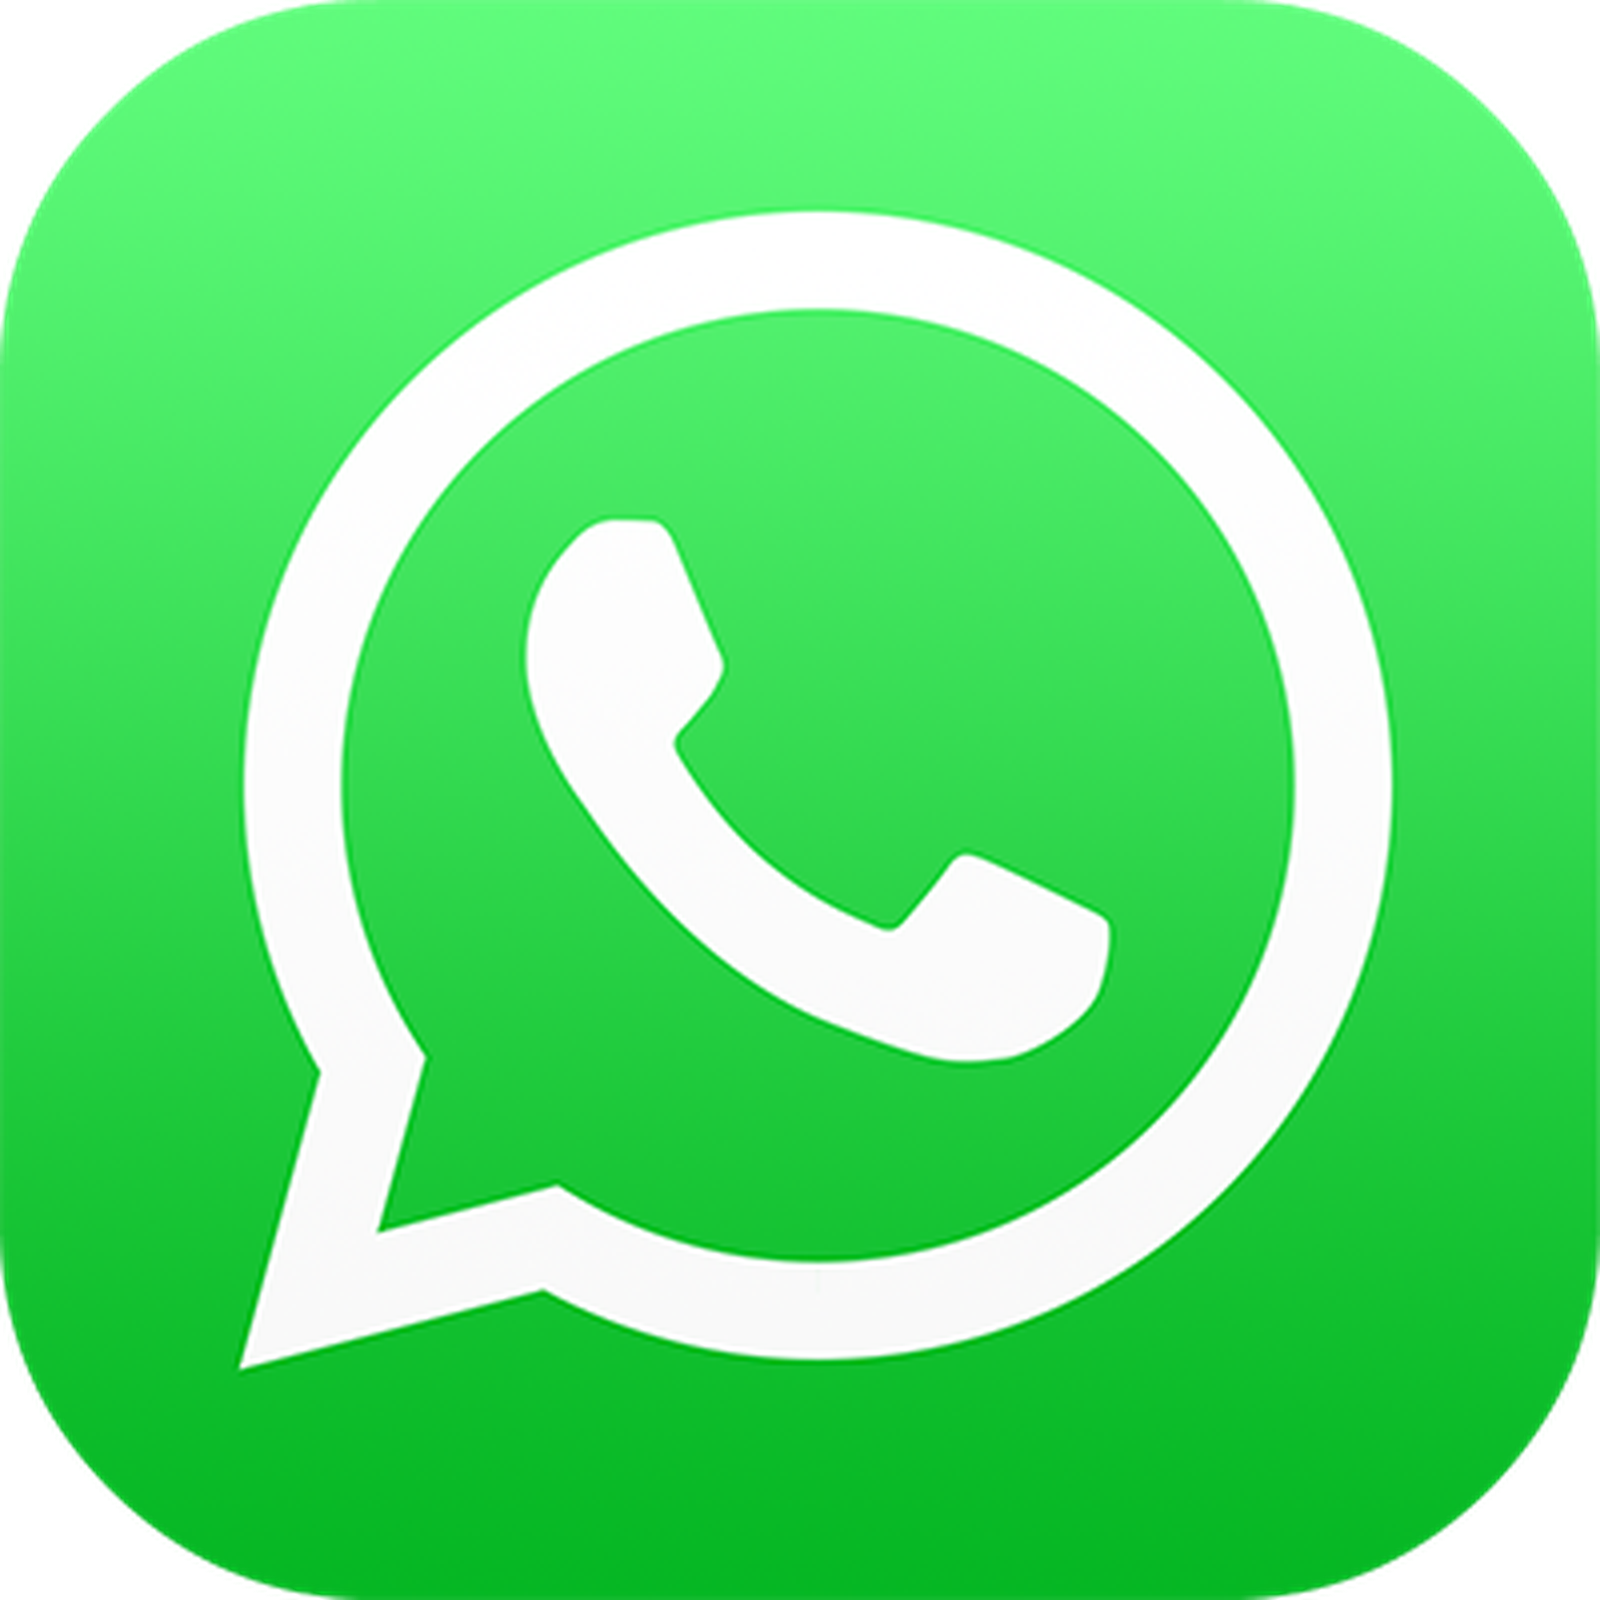 WhatsApp uses status updates to remind users of their privacy commitments